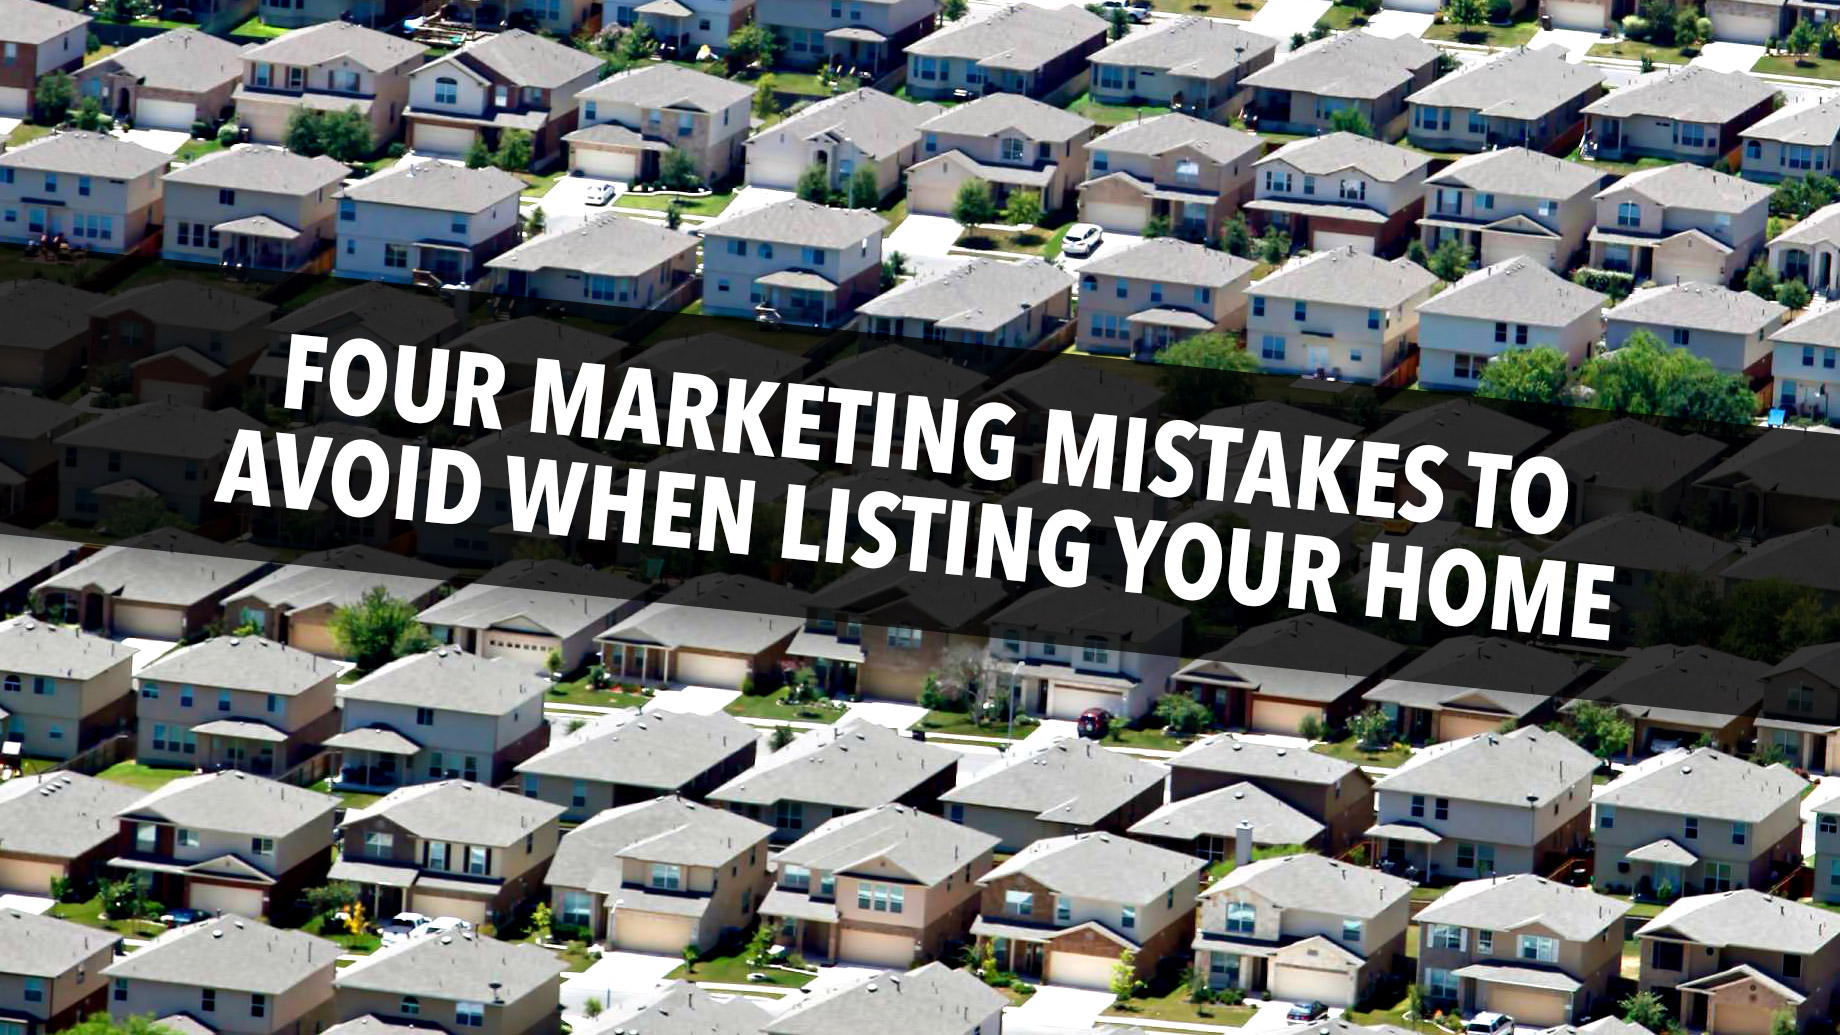 Four Marketing Mistakes to Avoid When Listing Your Home